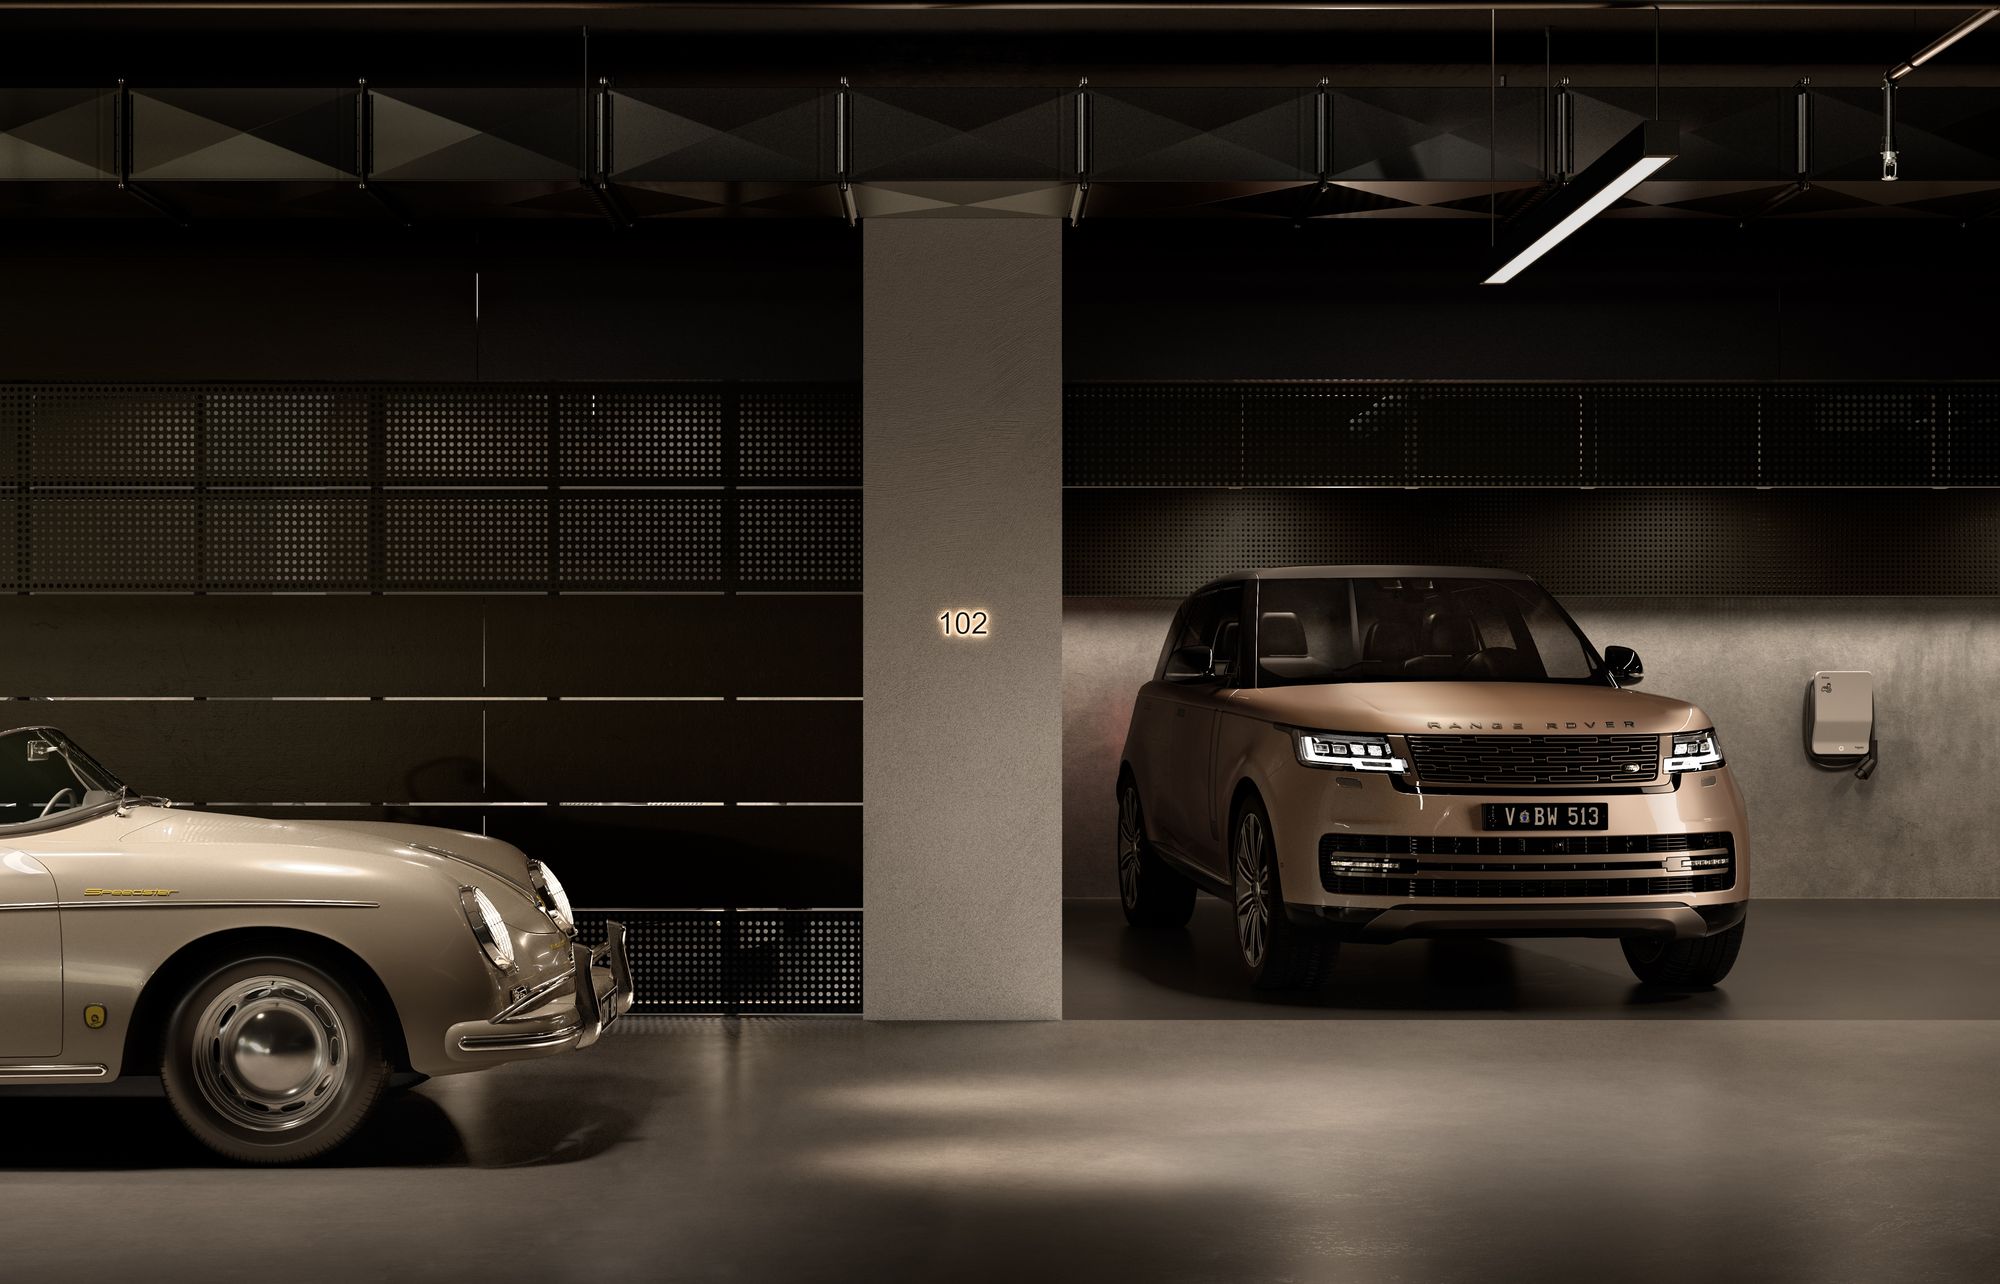 Como Toorak by Prime Edition x Jolson. This image presents a sophisticated and dimly lit garage space housing two contrasting vehicles. On the left, a classic, vintage car boasts elegant curves and a shiny chrome finish, reflective of historical automotive design. On the right, a modern luxury SUV is positioned, its design sharp and contemporary, highlighted by its distinctive LED headlights and a clean, minimalist aesthetic. The garage itself is sleek, with dark walls, geometrically patterned cabinets, and modern lighting that accentuates the cars' features. The presence of a charging unit on the wall suggests the SUV is likely an electric or hybrid model, indicating a blend of tradition and innovation within this space.